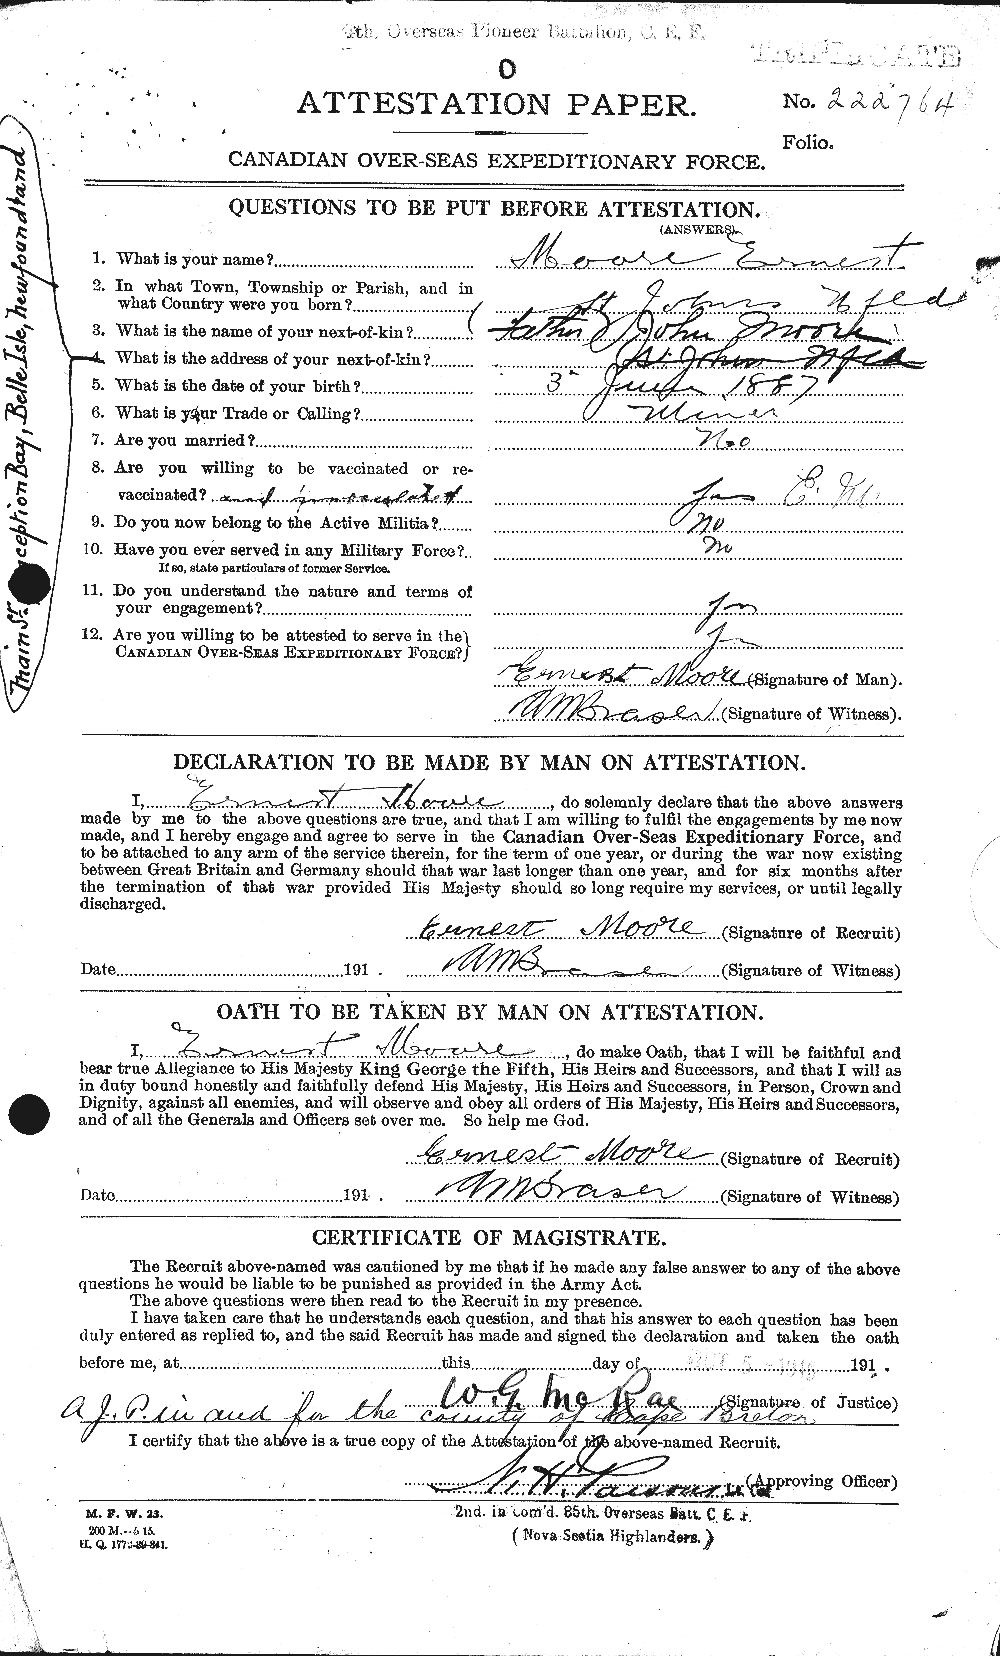 Personnel Records of the First World War - CEF 506658a